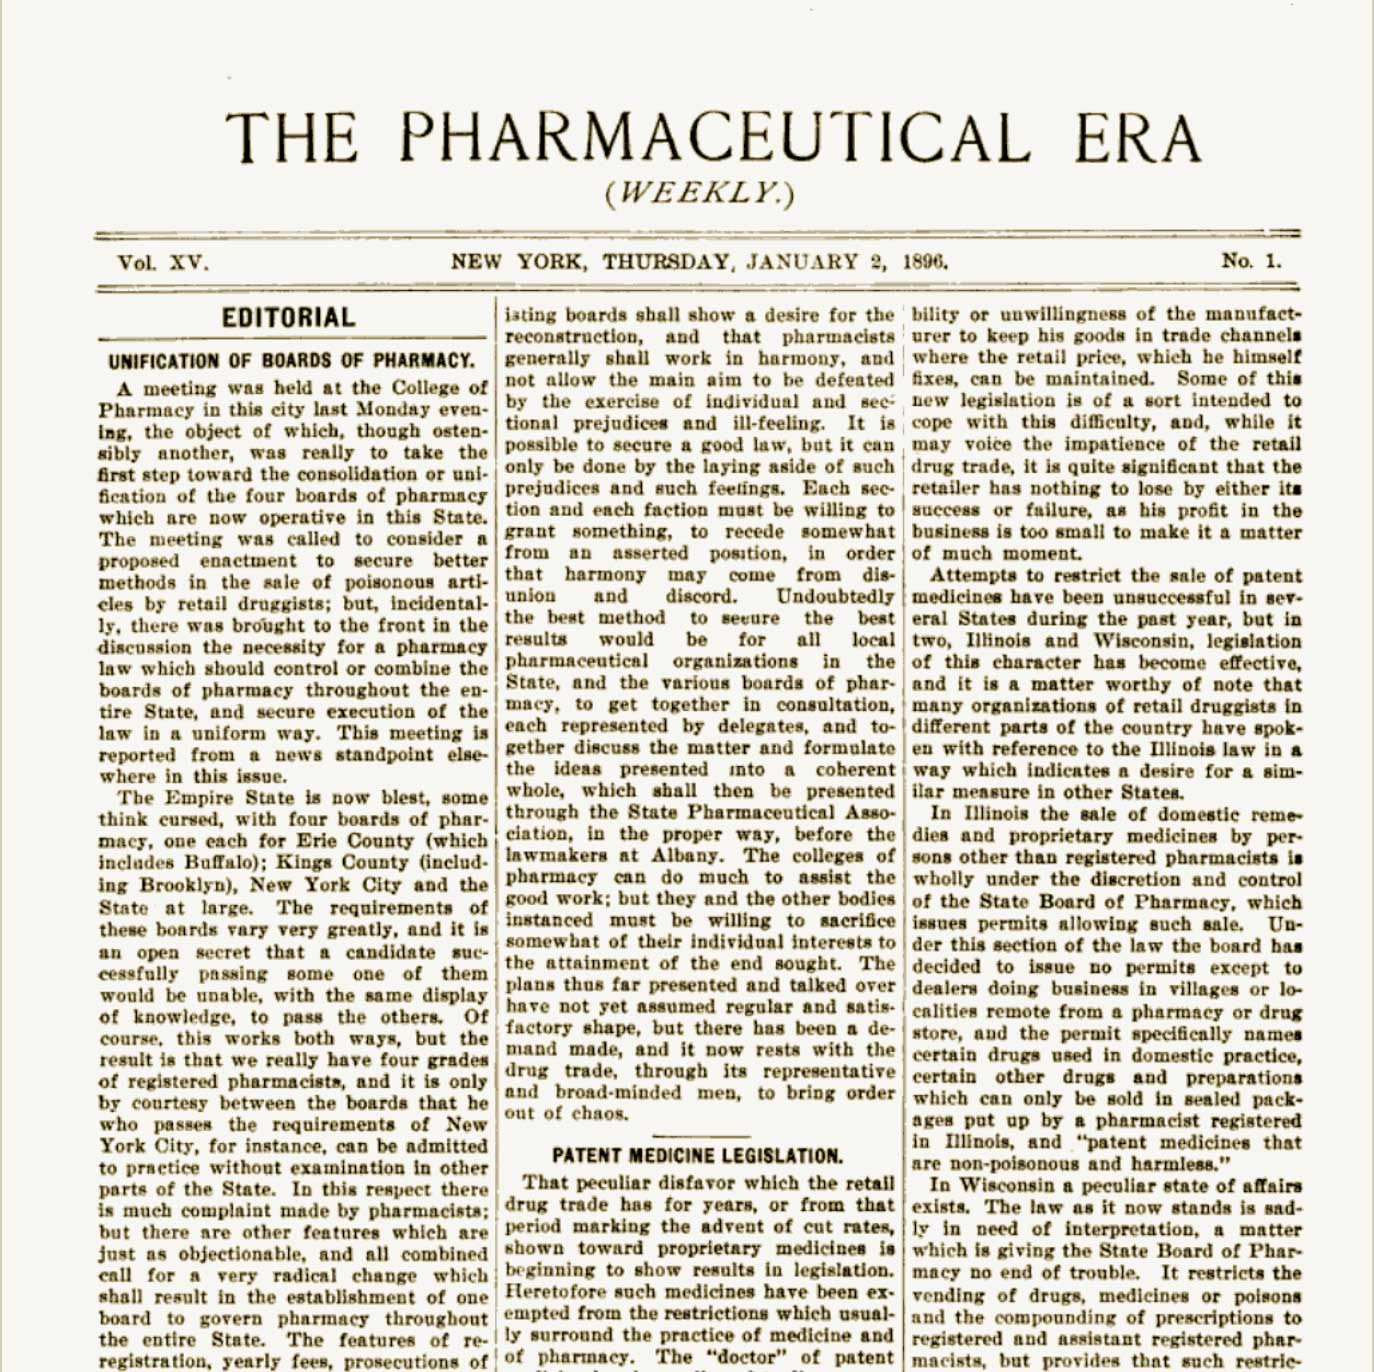 The Pharmaceutical Era Weekly describes the great variety of packaging available from the Robert Gair Company, demonstrating the legacy of Robert Gair